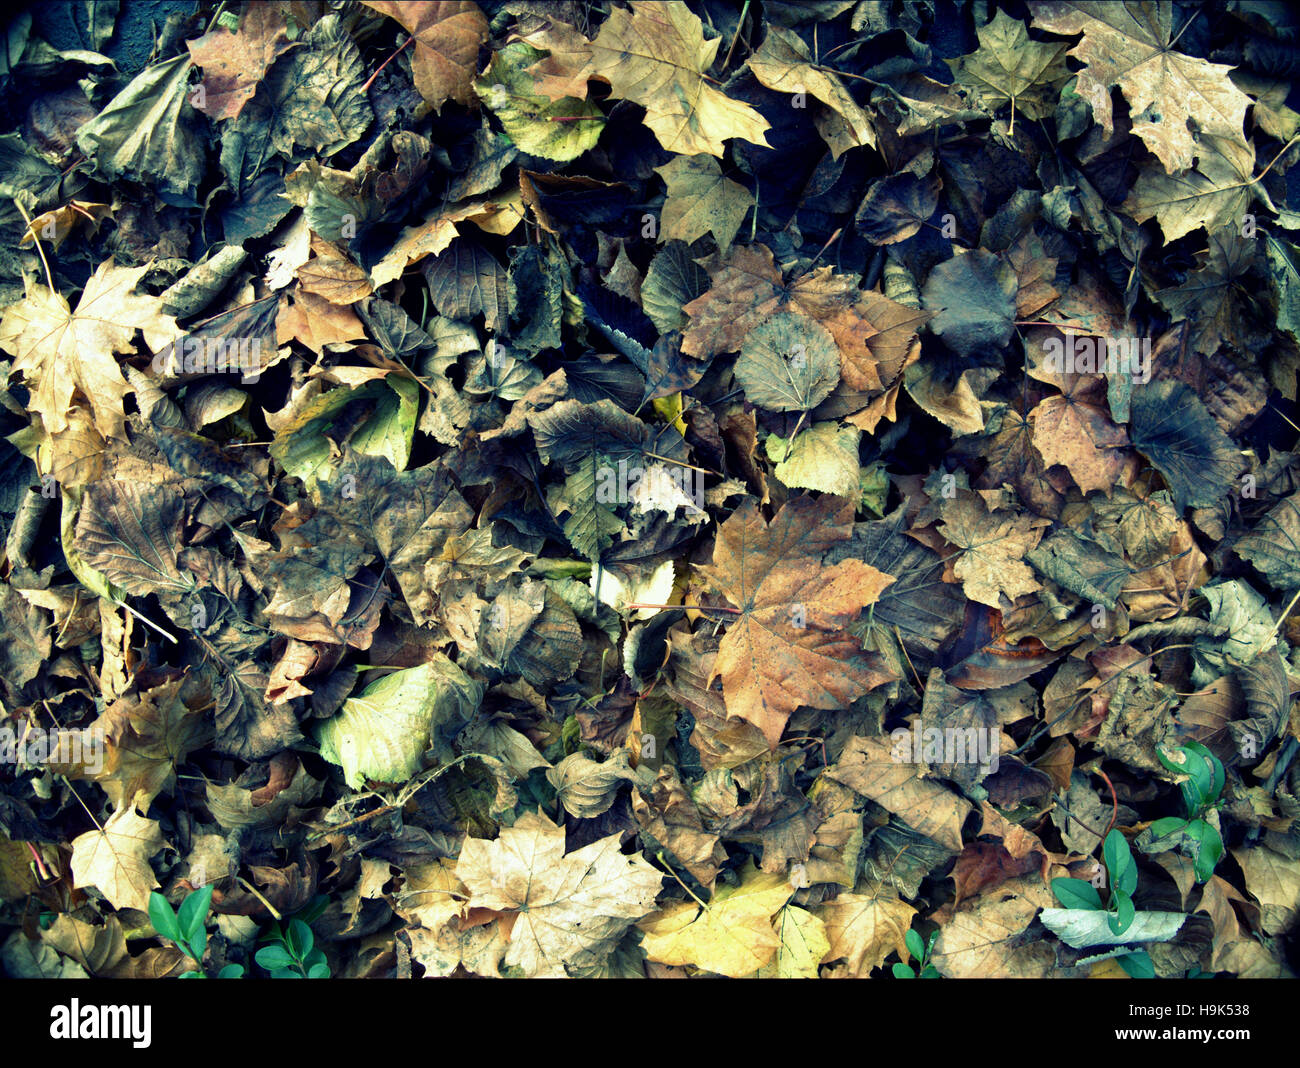 Abstract Leaf Backgrounds Fallen Leaves On The Forest Floor Stock